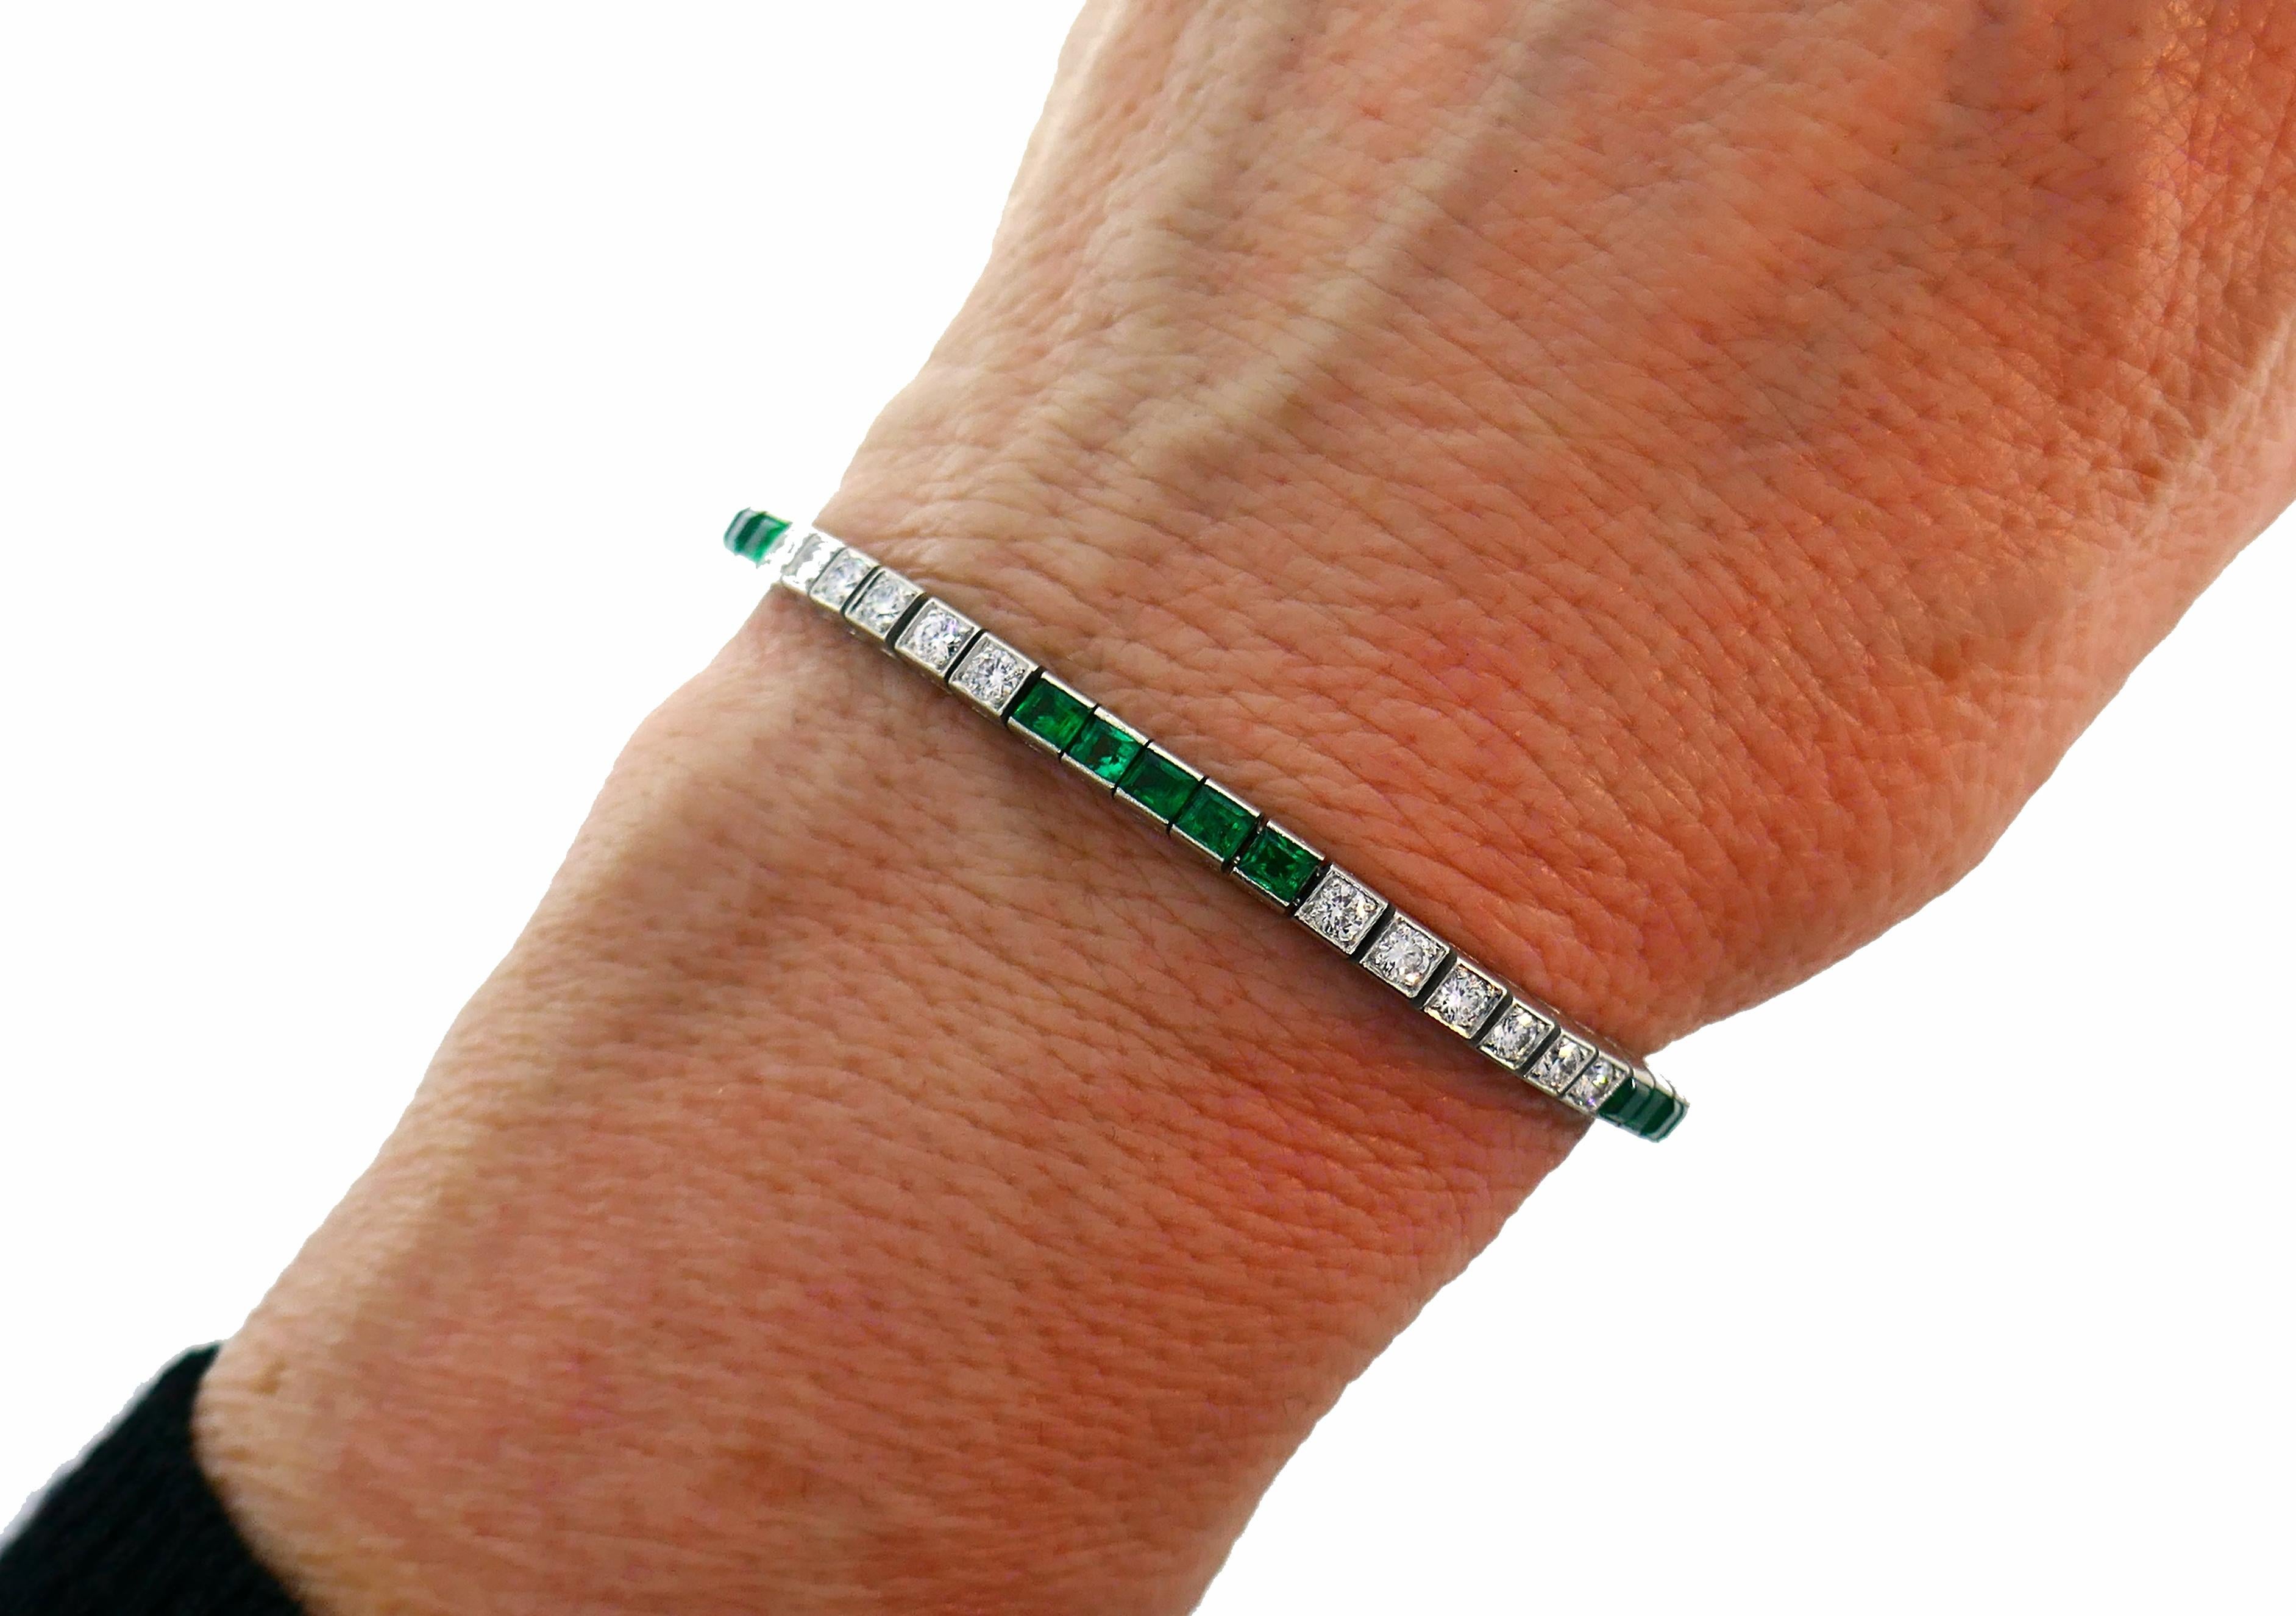 Classic tennis bracelet created by Tiffany & Co. in the 1960s. 
Made of platinum and set with round brilliant cut diamonds (G-h color, VS clarity, total weight approximately 1.80 carats) and table cut emeralds (total weight approximately 3.25